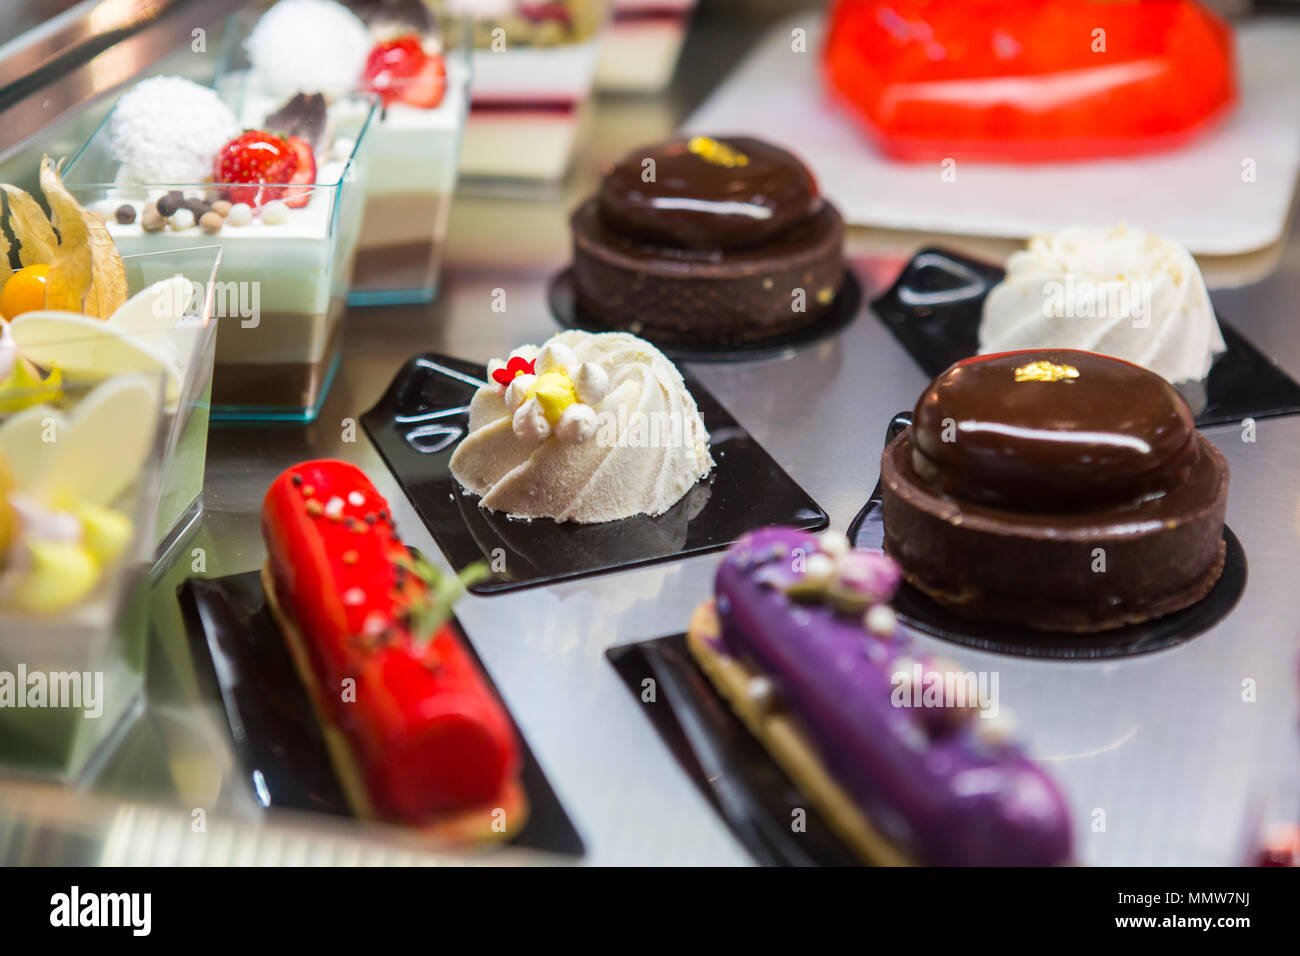 Variety of delicious sweet dessert on display in an exhibition. Stock Photo